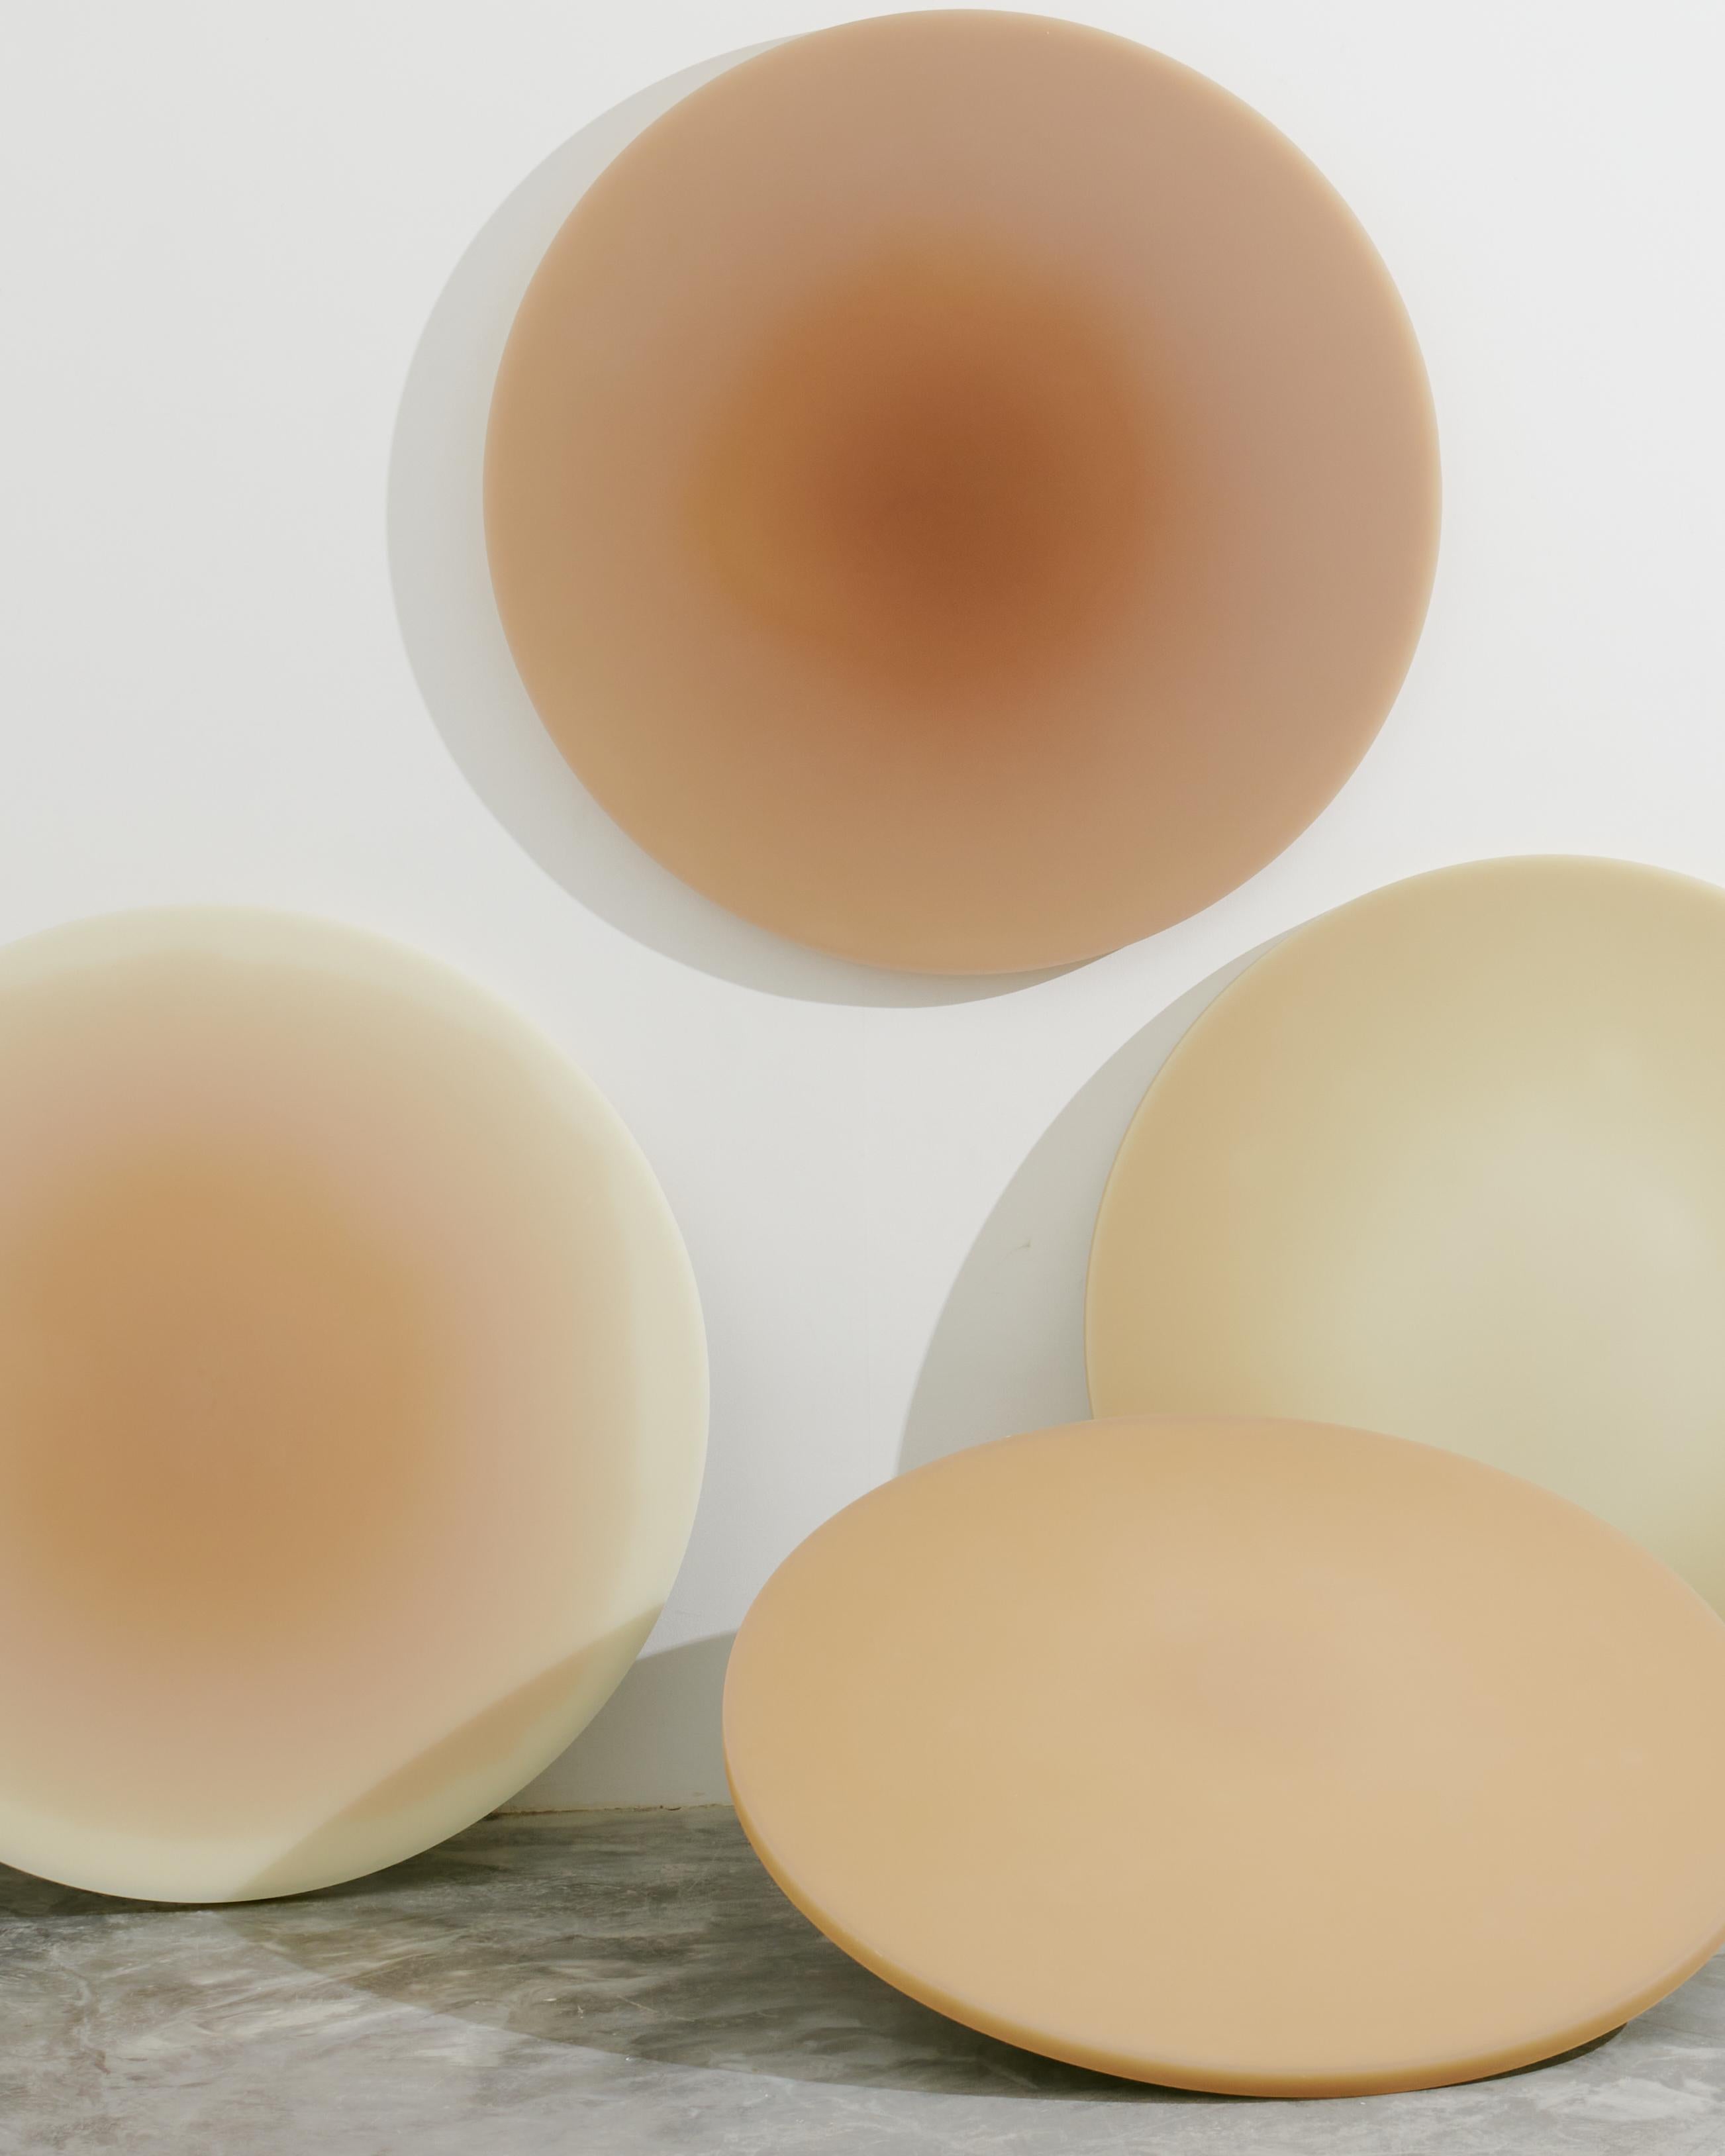 Tone Halo III by Facture
Resin, Aluminum, Wood
L 48 × W 48 × H 1.5 in
L121.92 × W121.92 × H 3.81cm


A large circular wall object features a soothing hue transitioning from a medium nude tone to a light nude tone. The shifting saturation levels